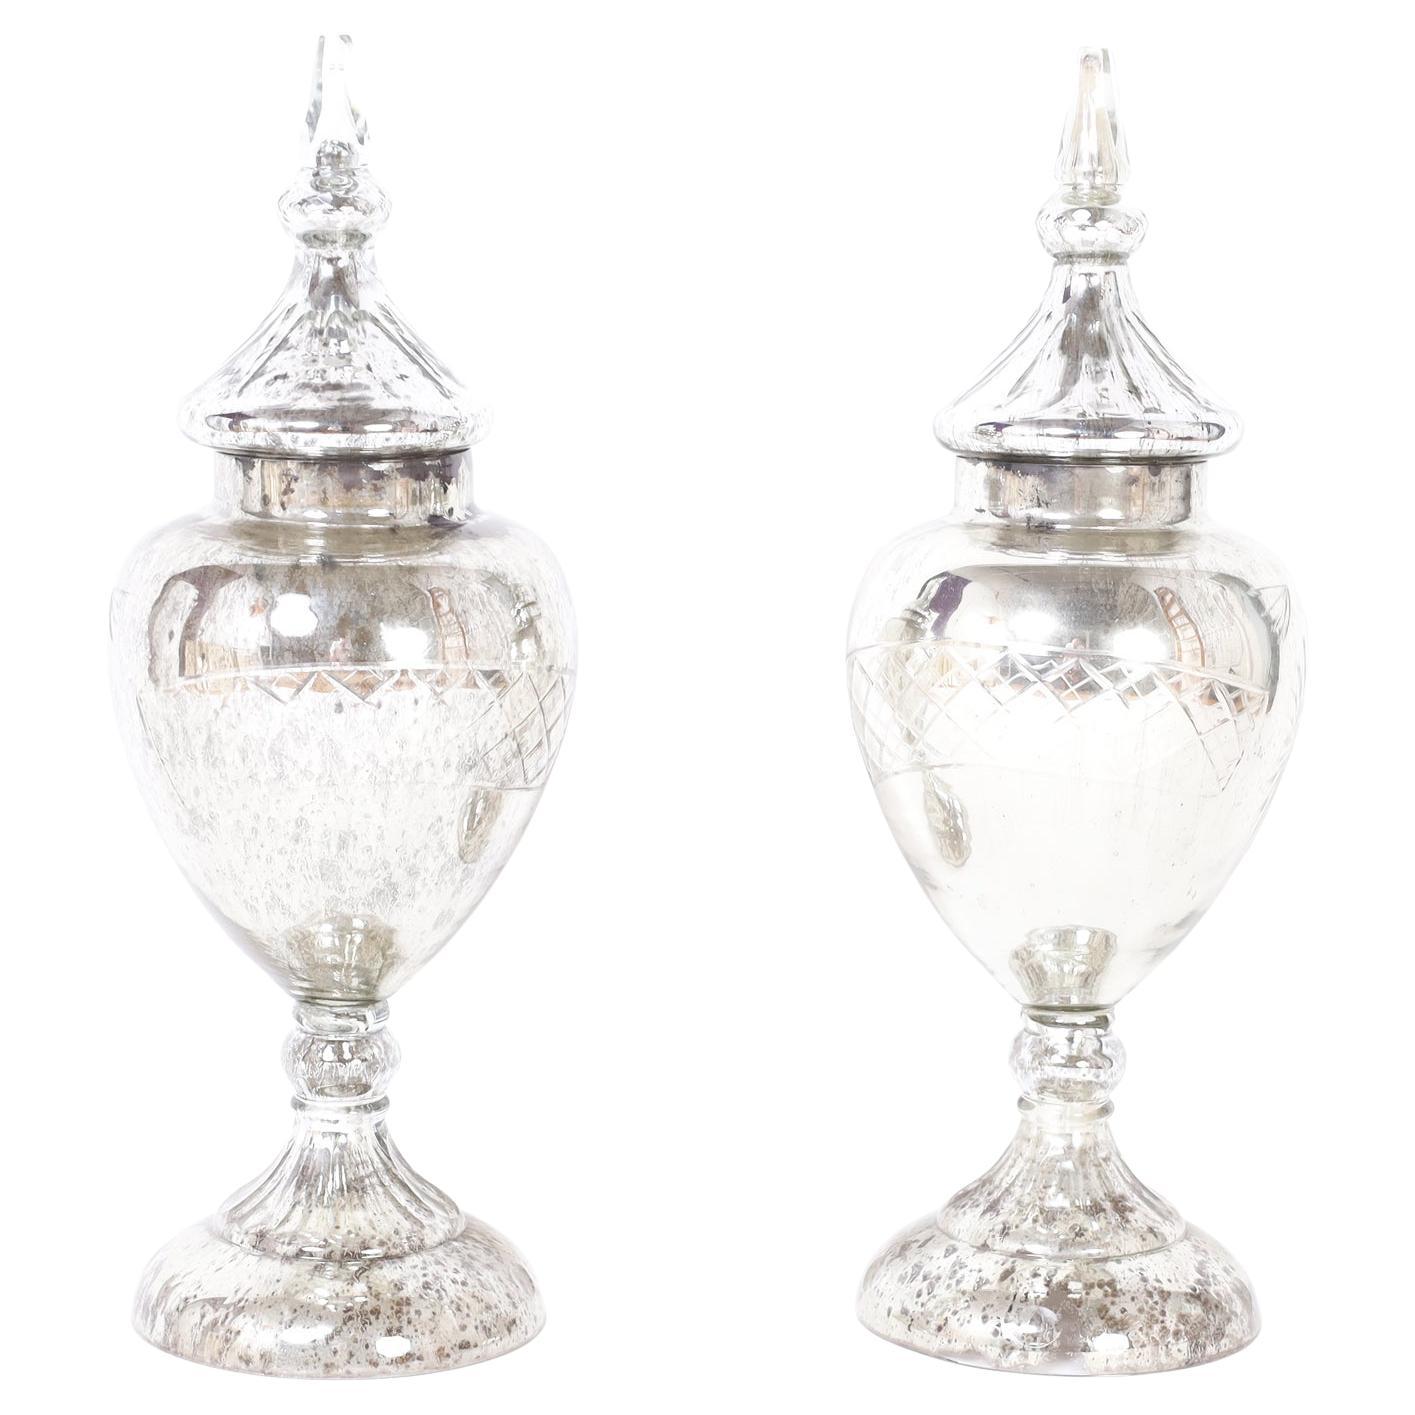 Antique Mercury Glass Apothecary Urns For Sale